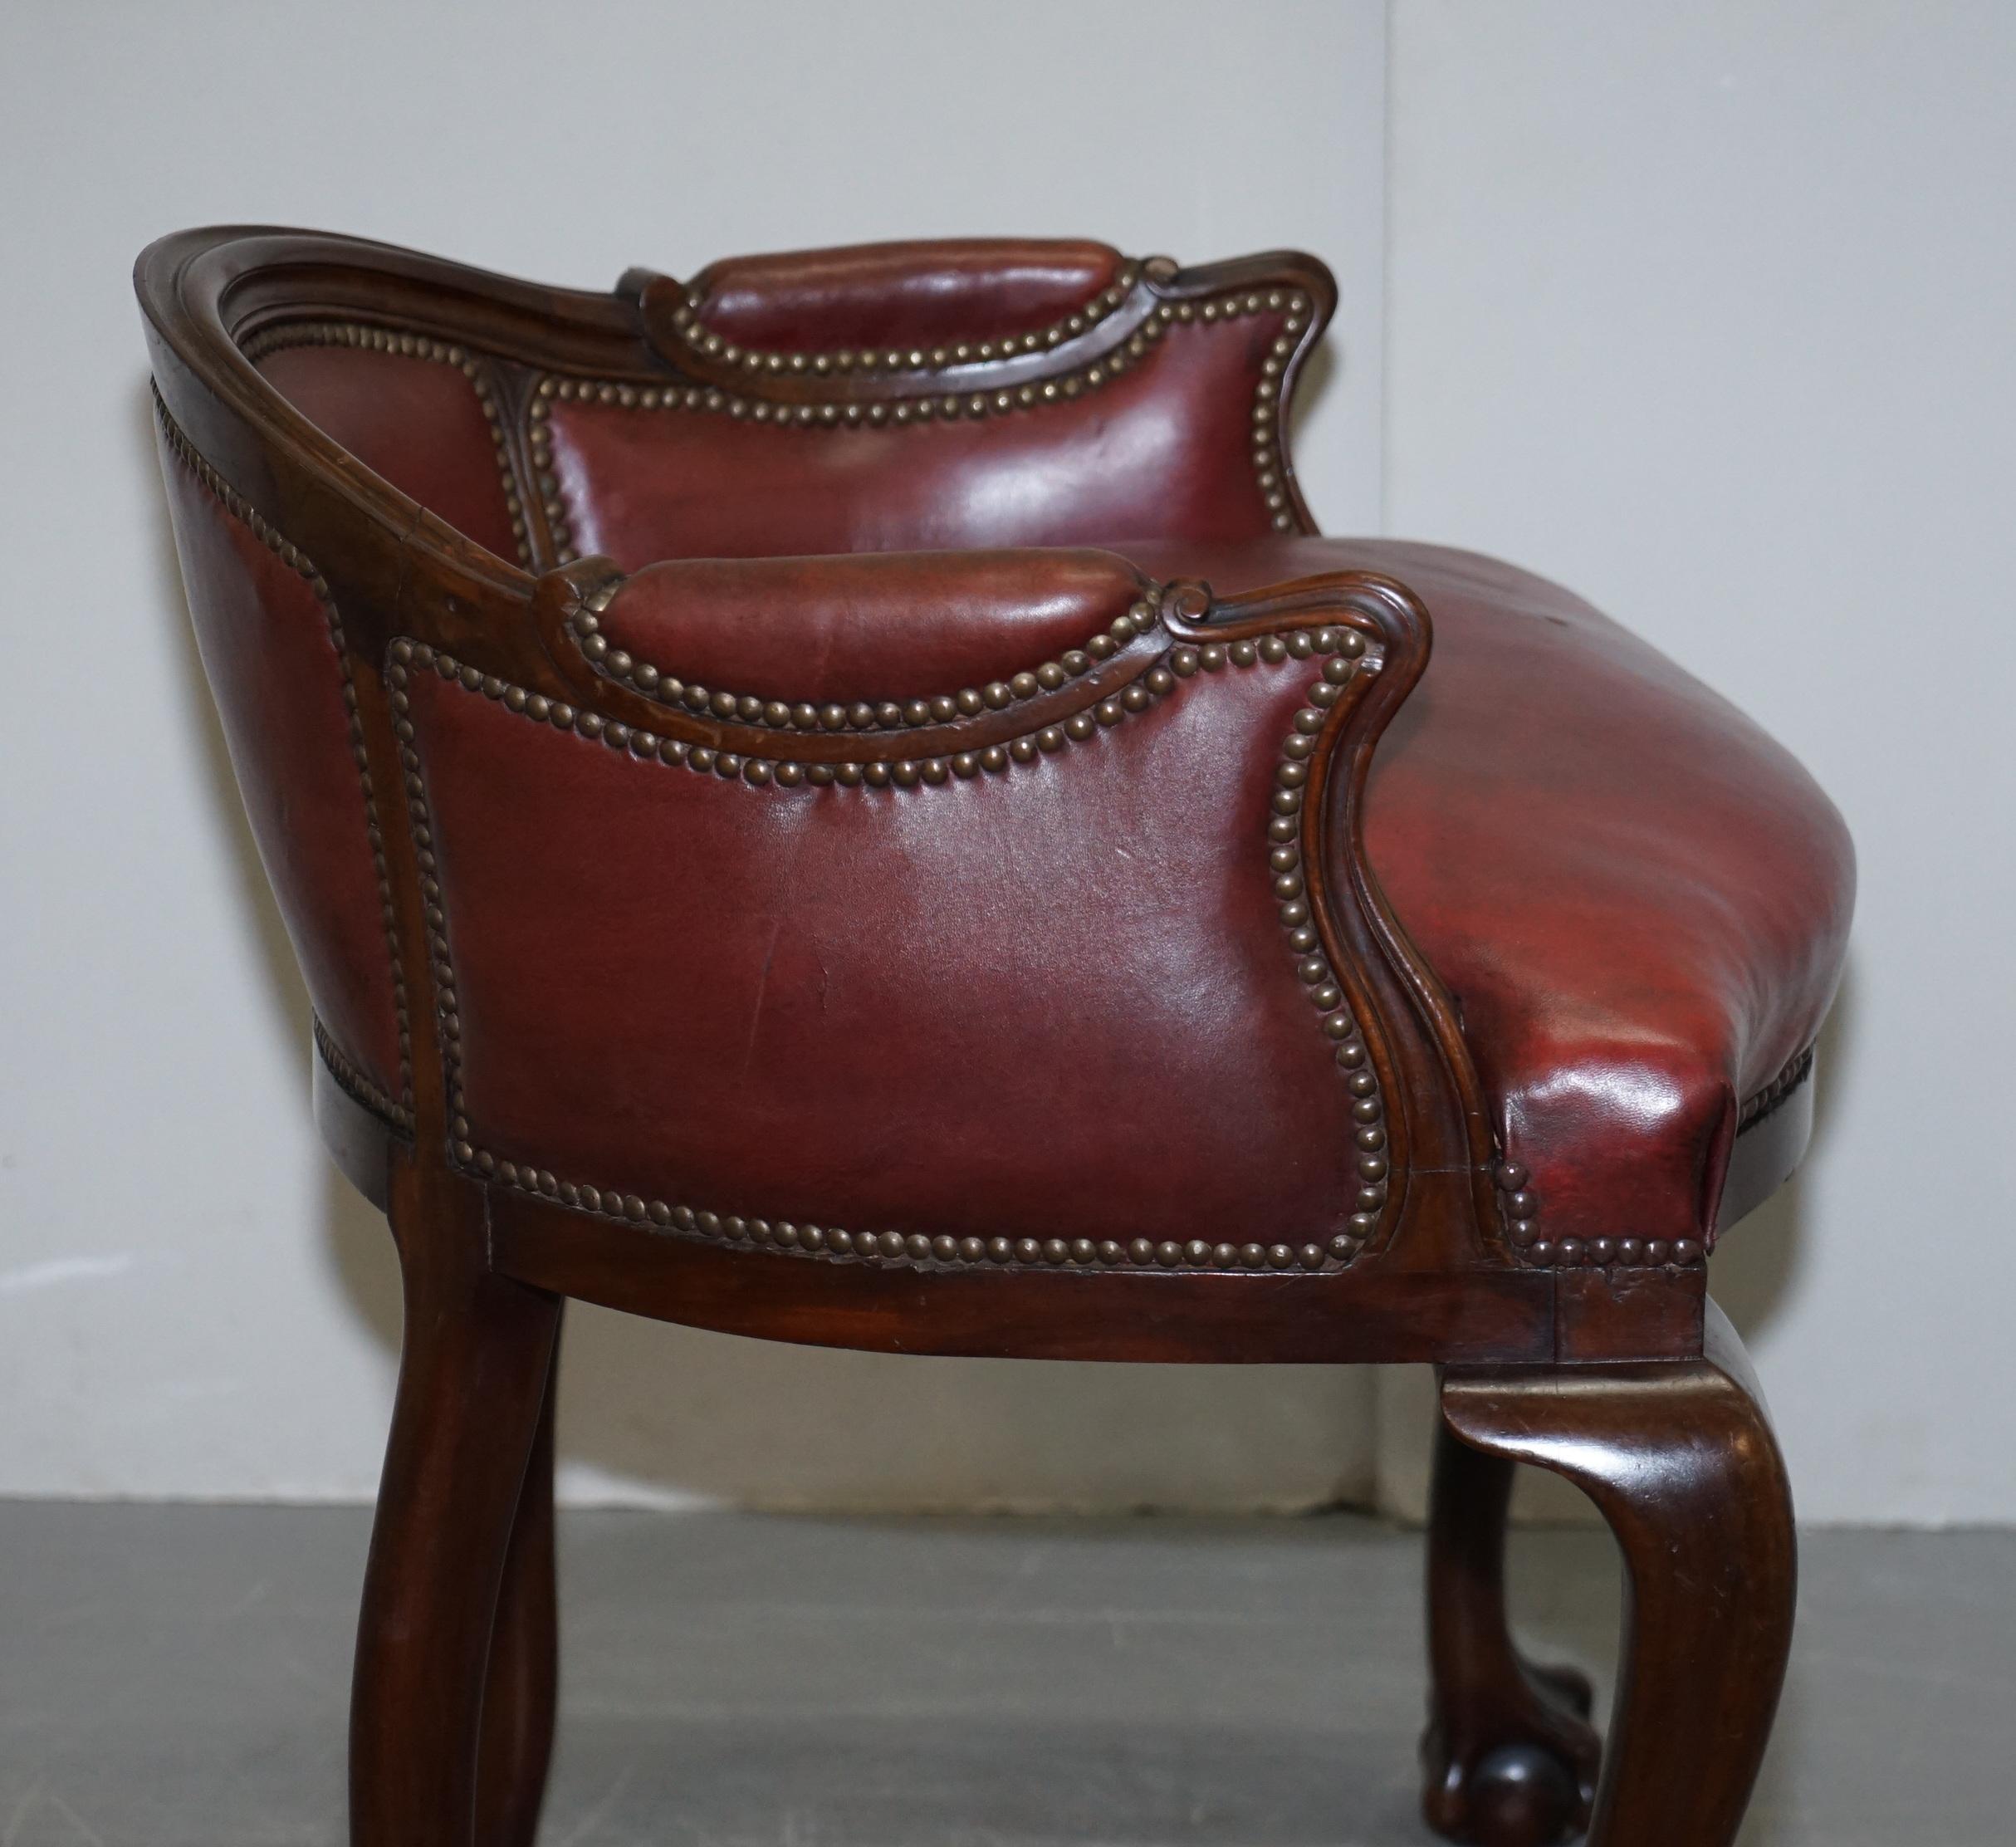 Claw & Ball Cabriolet Leg Oxblood Leather Small Chair or Stool Office or Desk 2